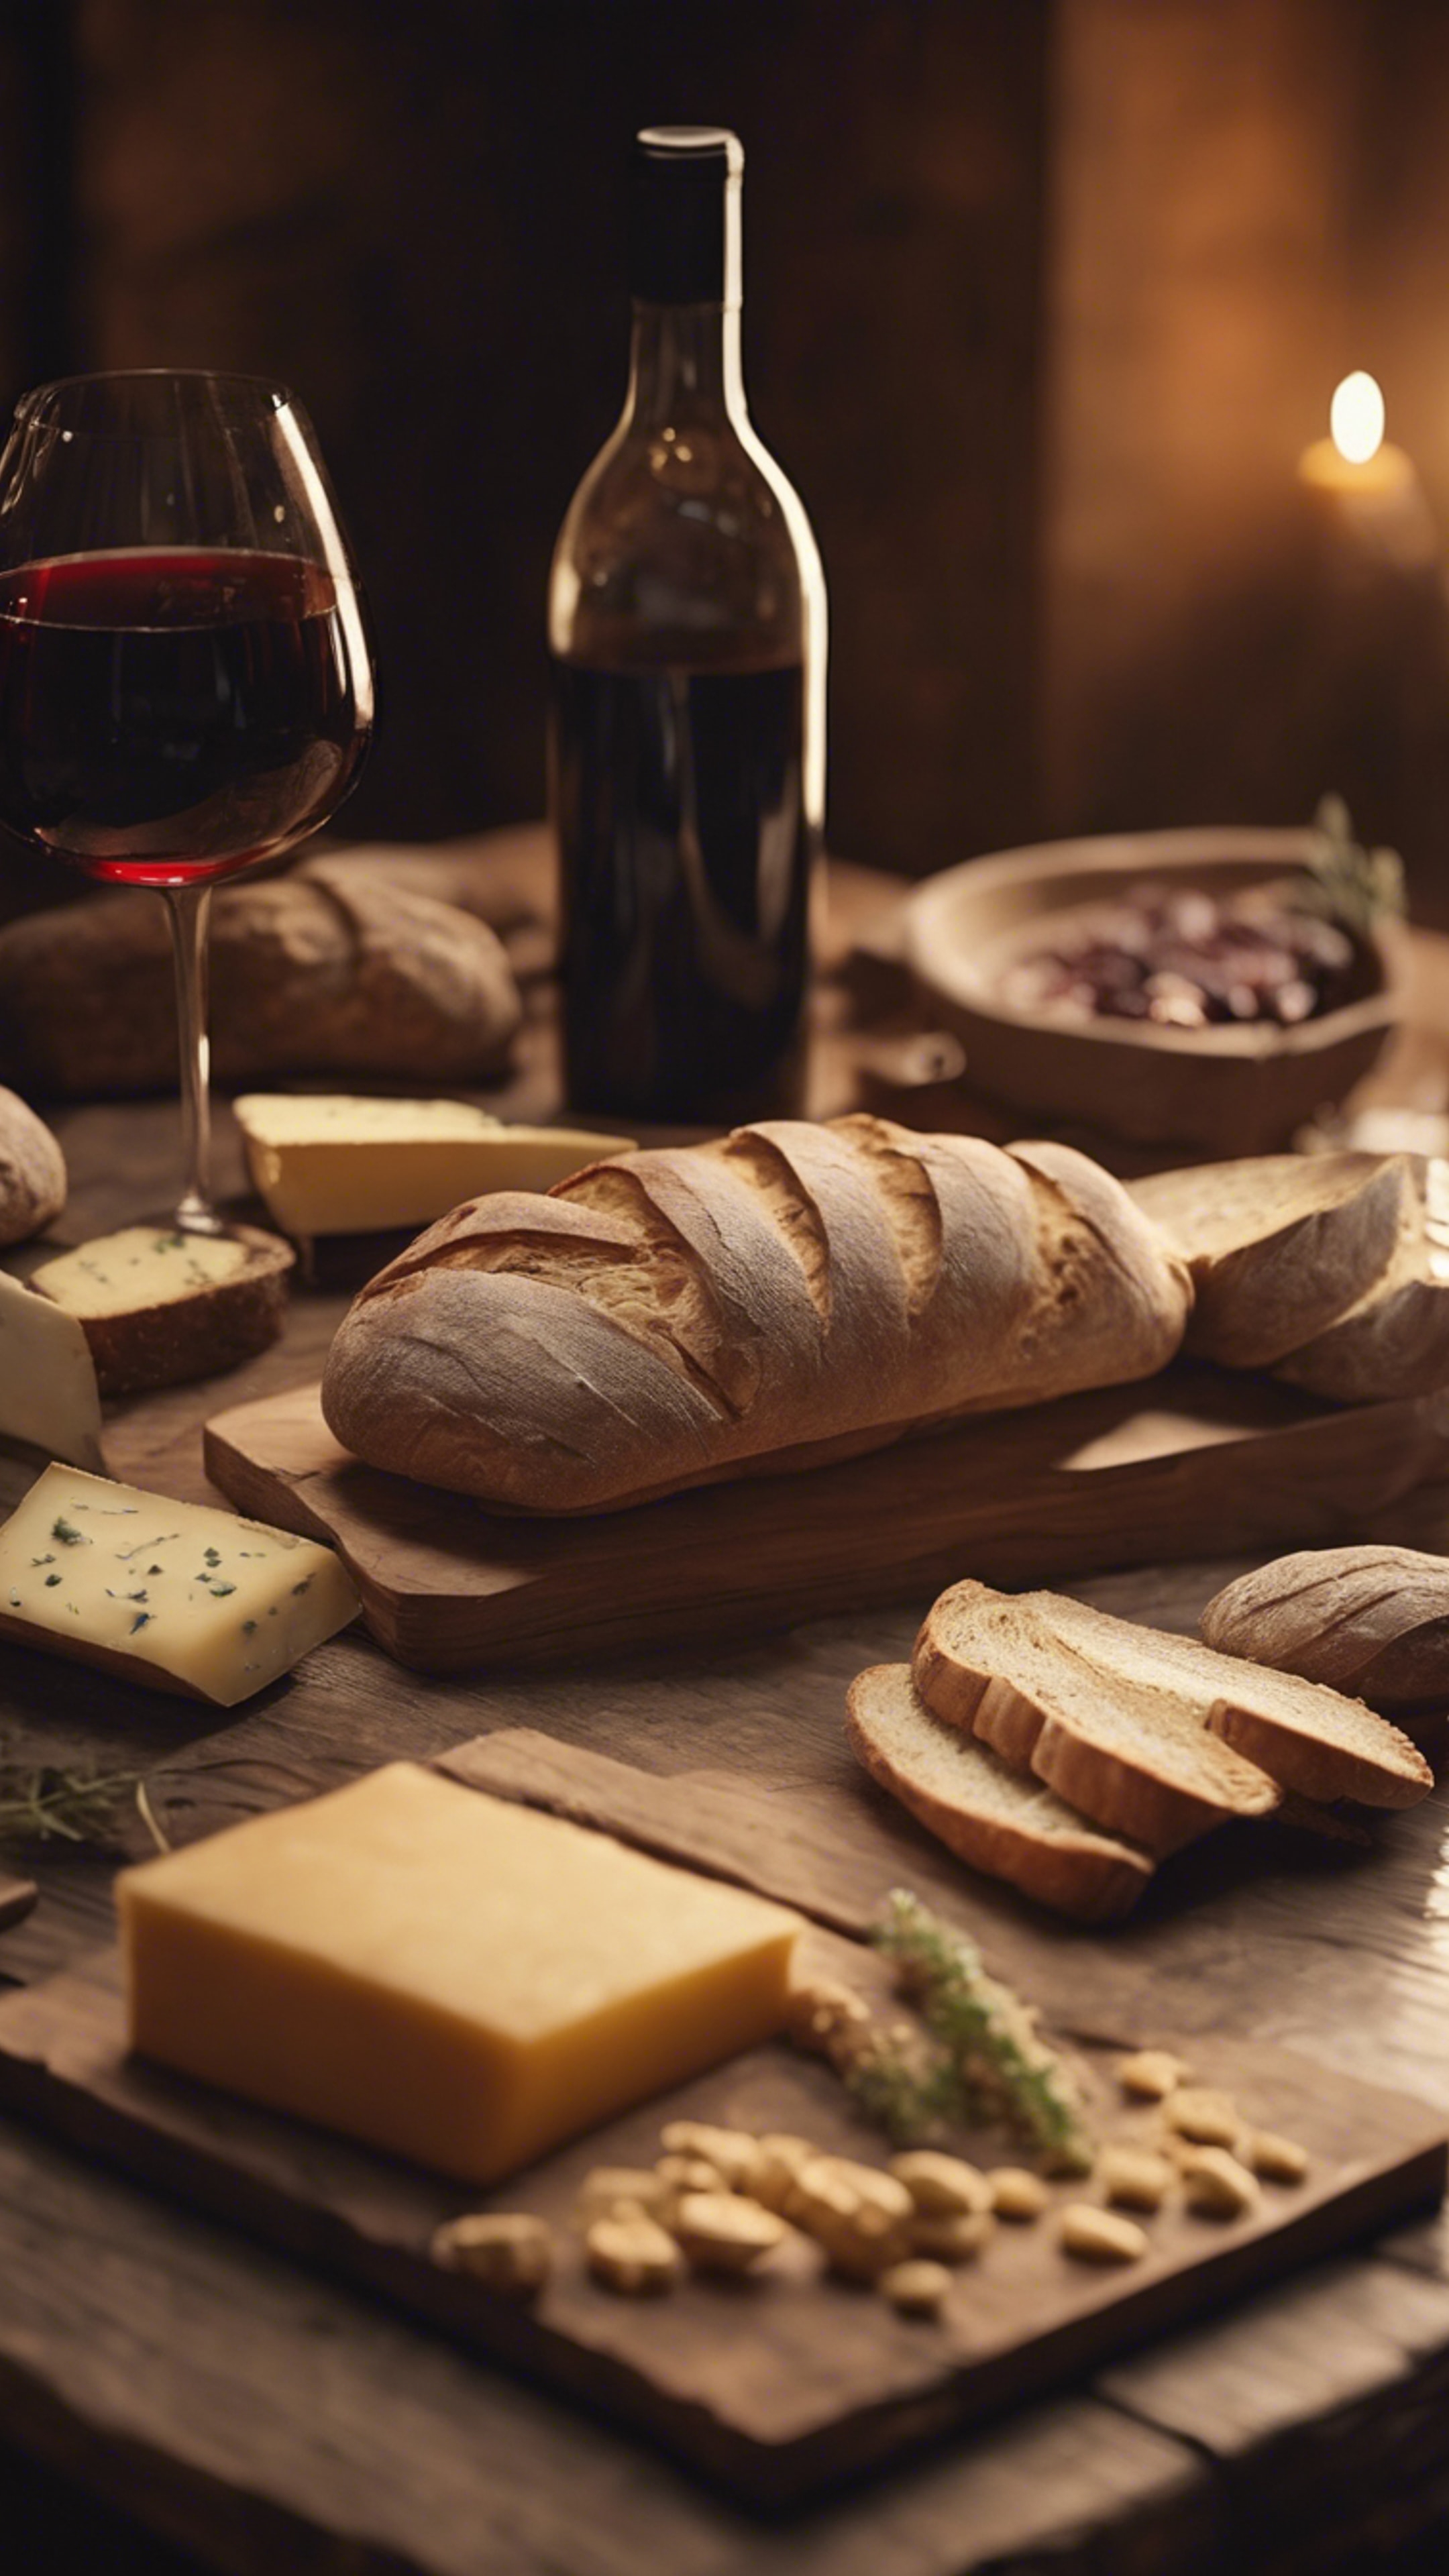 Detailed close-up of a rustic French country-style wooden table set with fresh bread, wine, and cheese under warm interior lighting. Wallpaper[6a74bb7d88b74d998281]